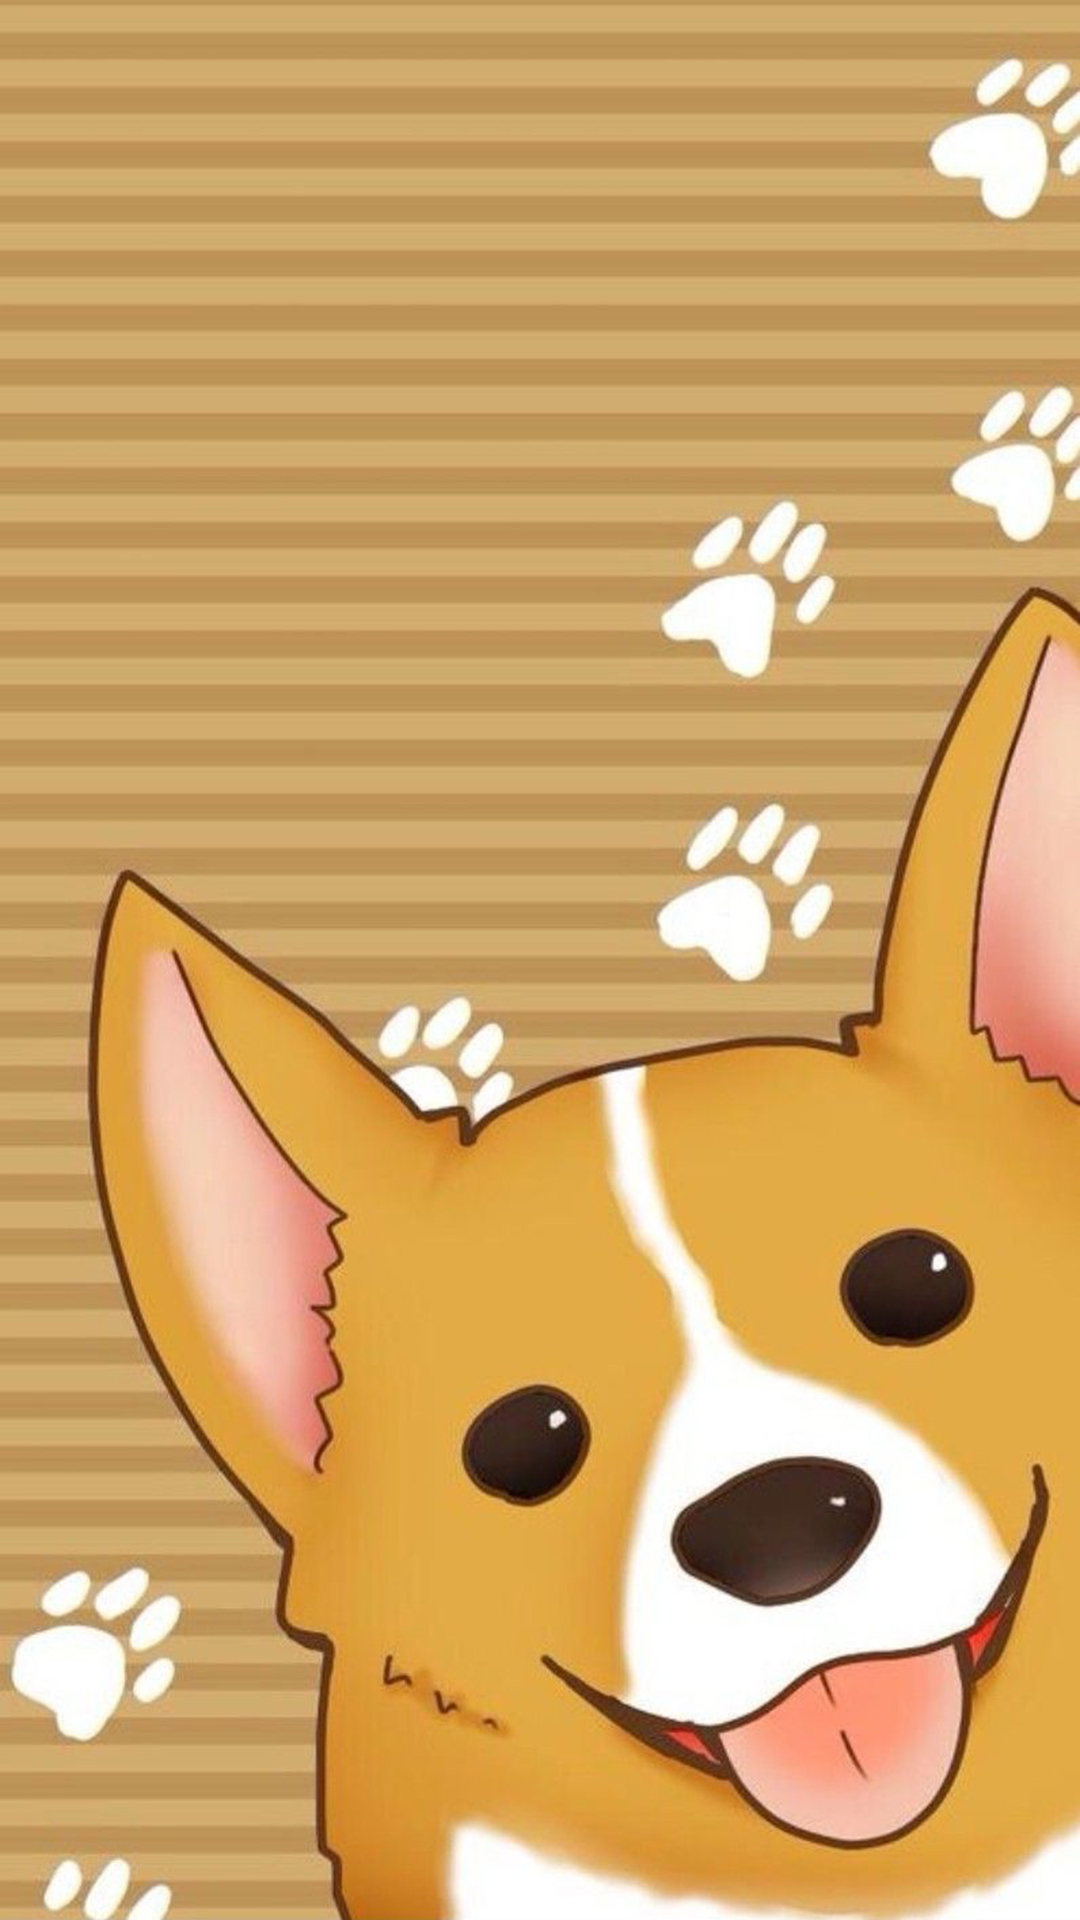 Cute Cartoon Dog Wallpapers for Mobile 